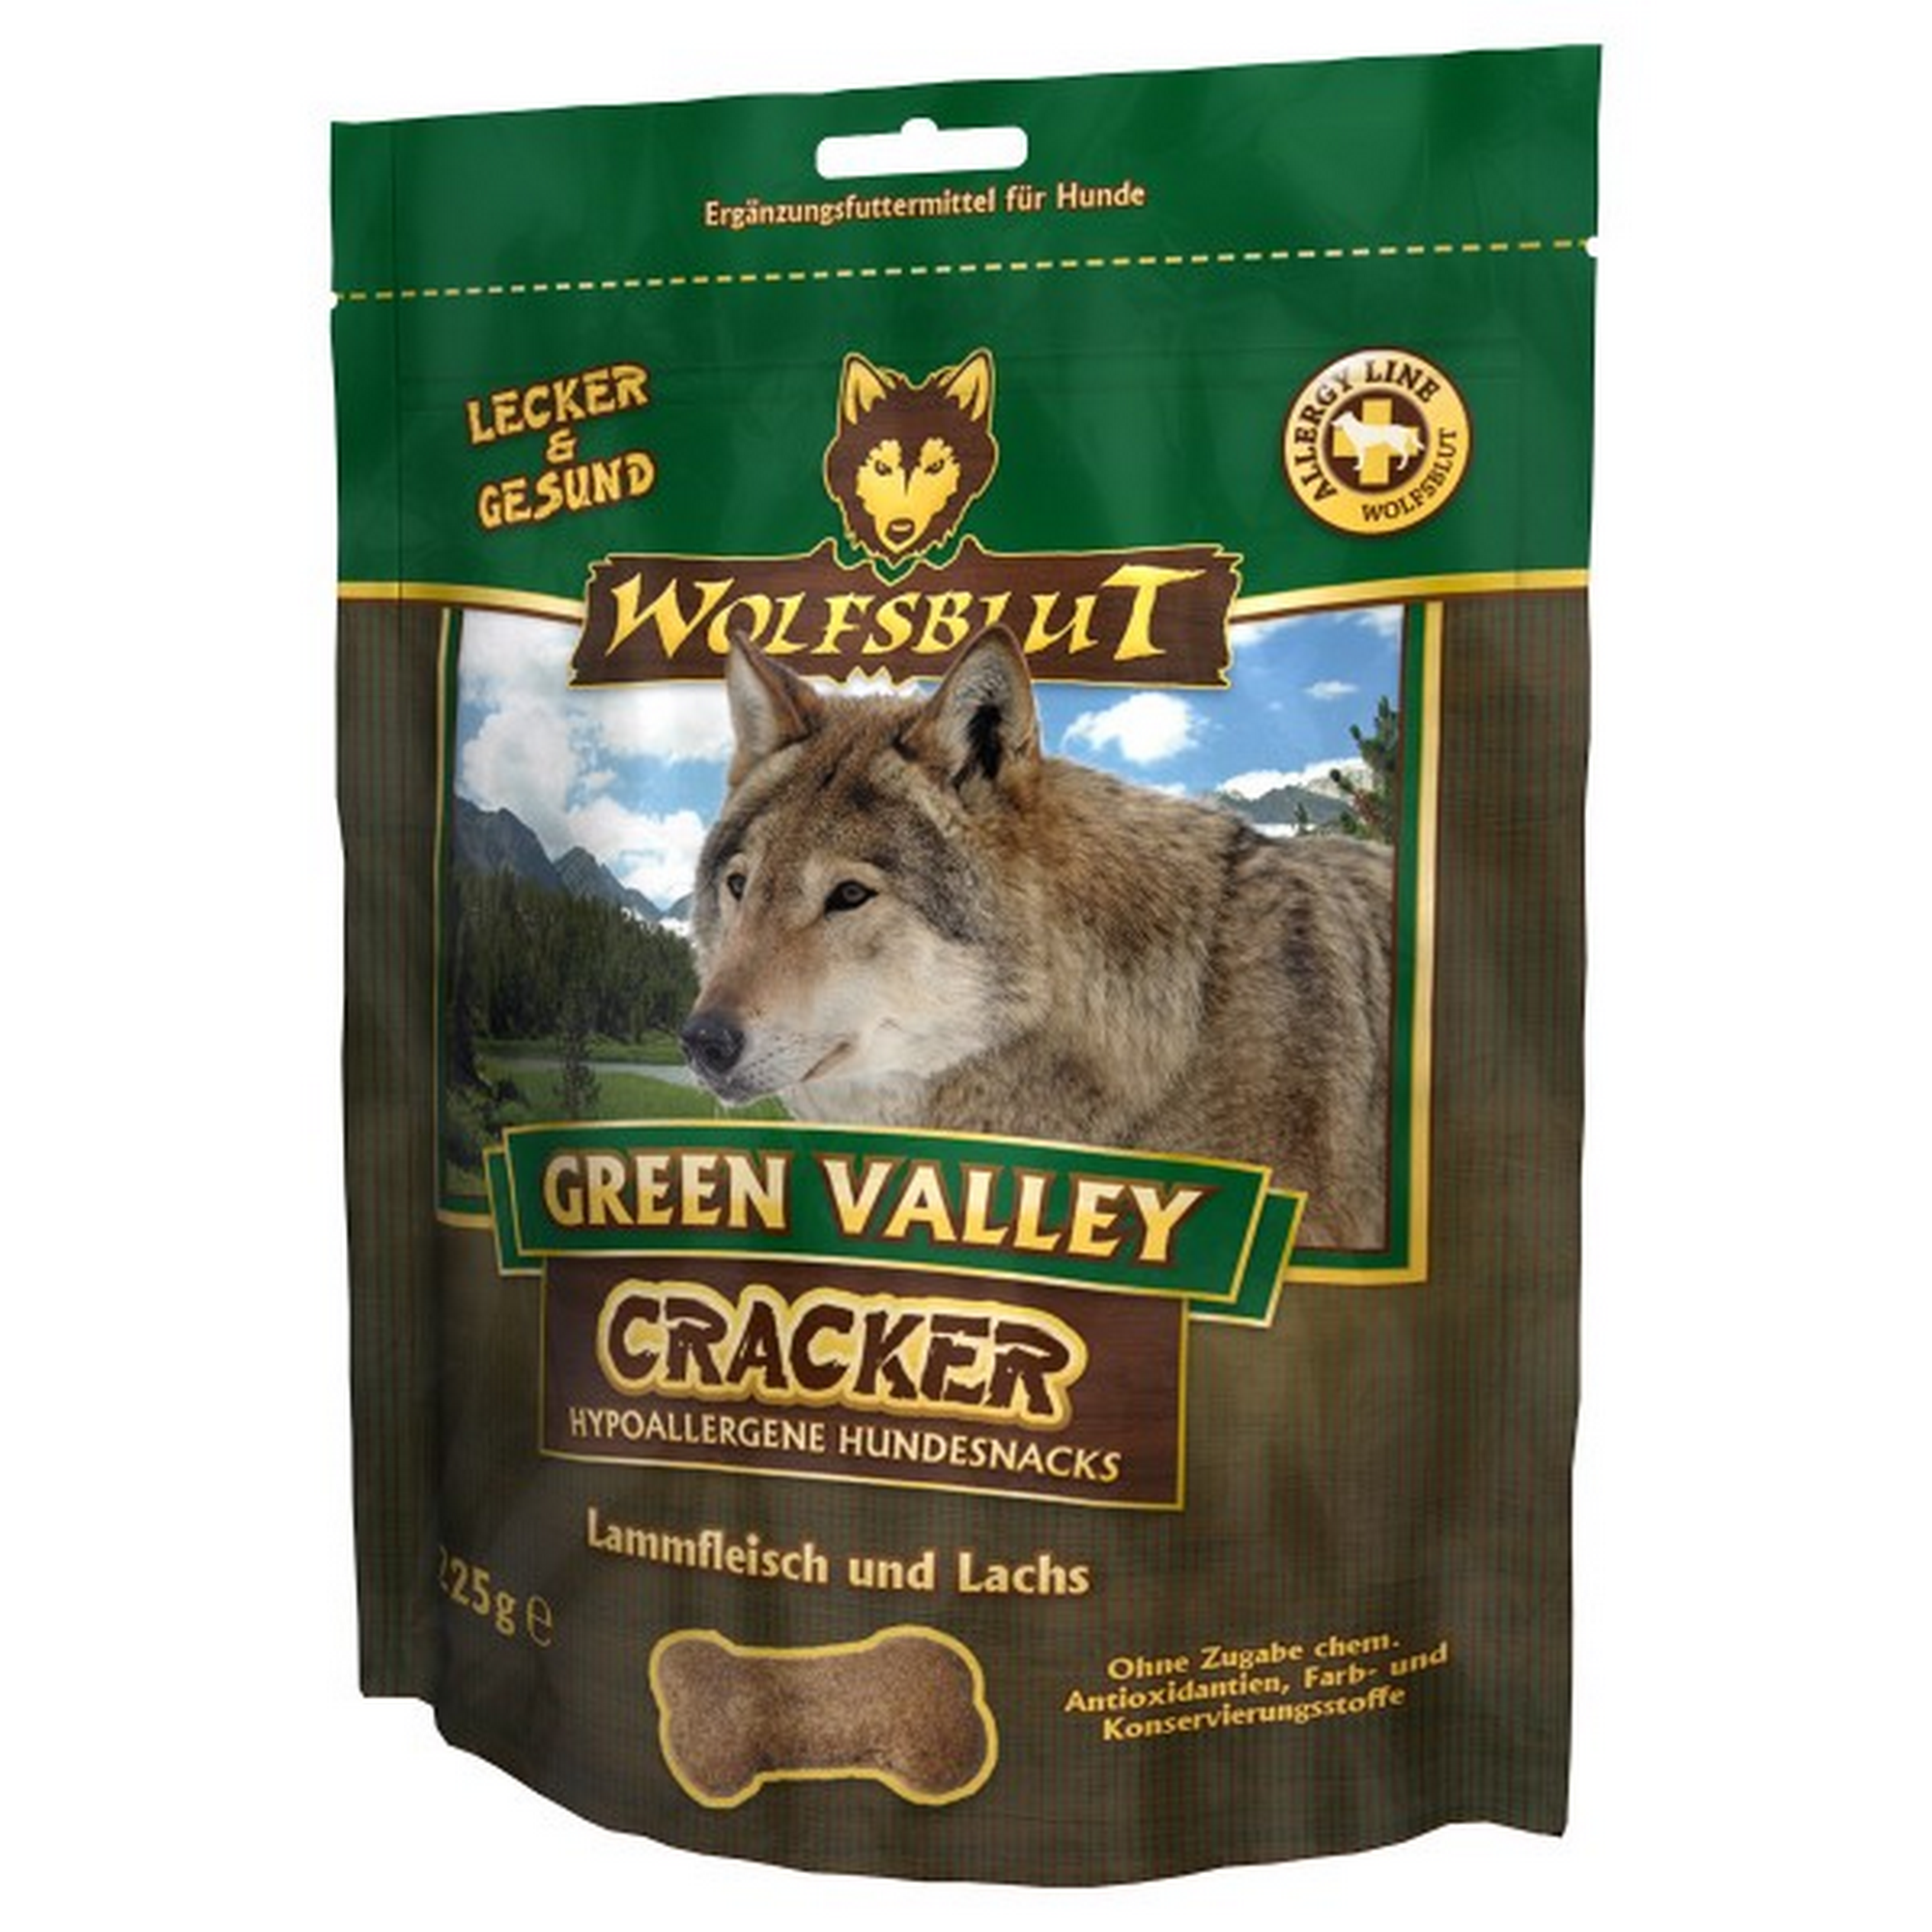 Hundesnack 'Green Valley' Lamm und Lachs 225 g + product picture